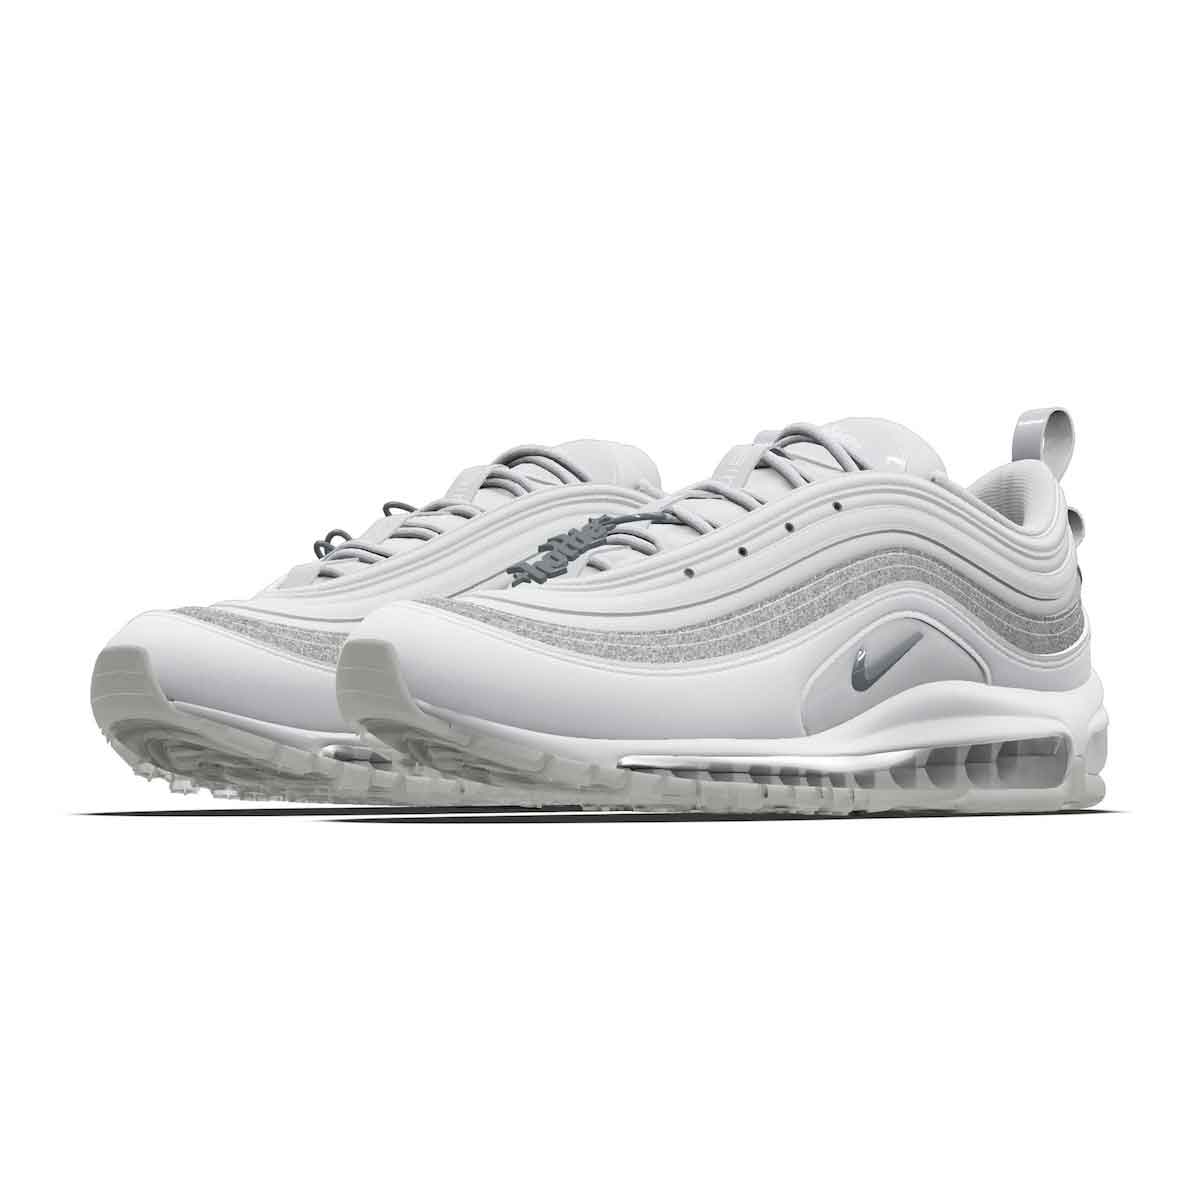 megan thee stallion nike air max 97 something for thee hotties by you fz4048 900 16